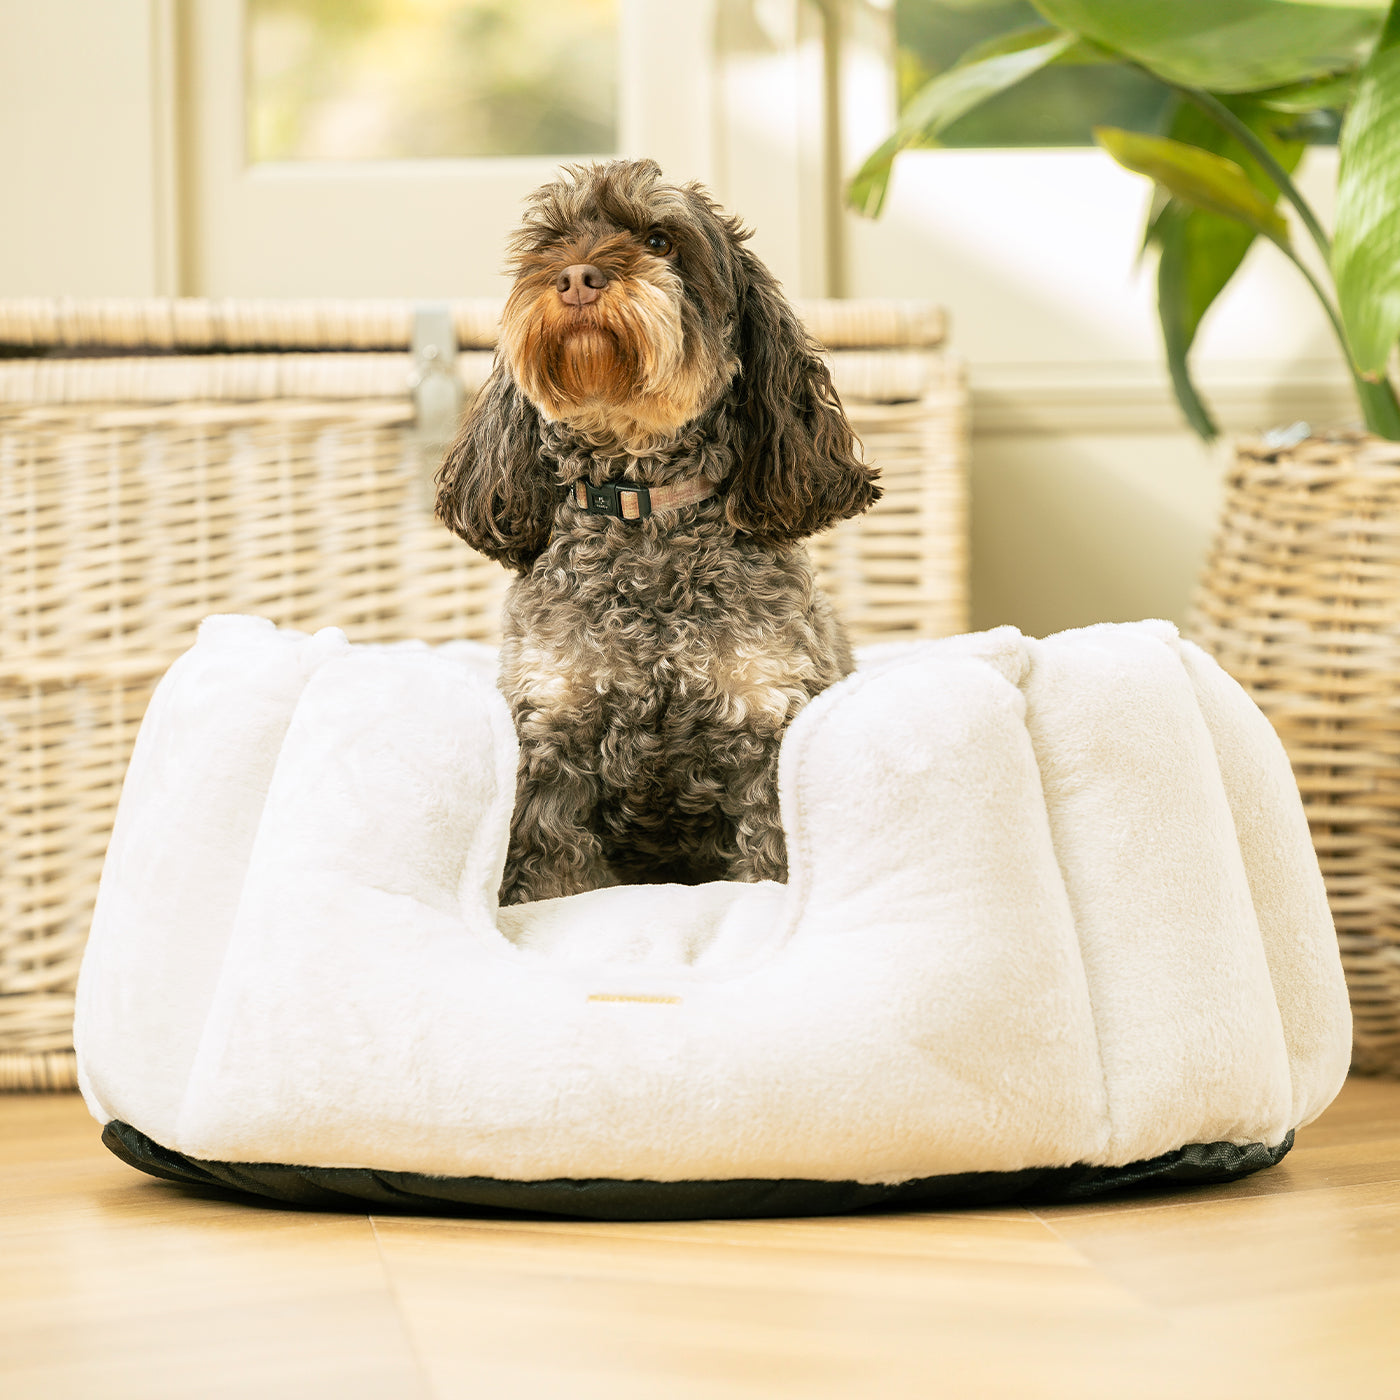 Discover Our Luxurious High Wall Bed For Dogs, Featuring inner pillow with plush teddy fleece on one side To Craft The Perfect Cat Bed In Stunning Anti-Anxiety Cream Faux Fur! Available To Personalise Now at Lords & Labradors    